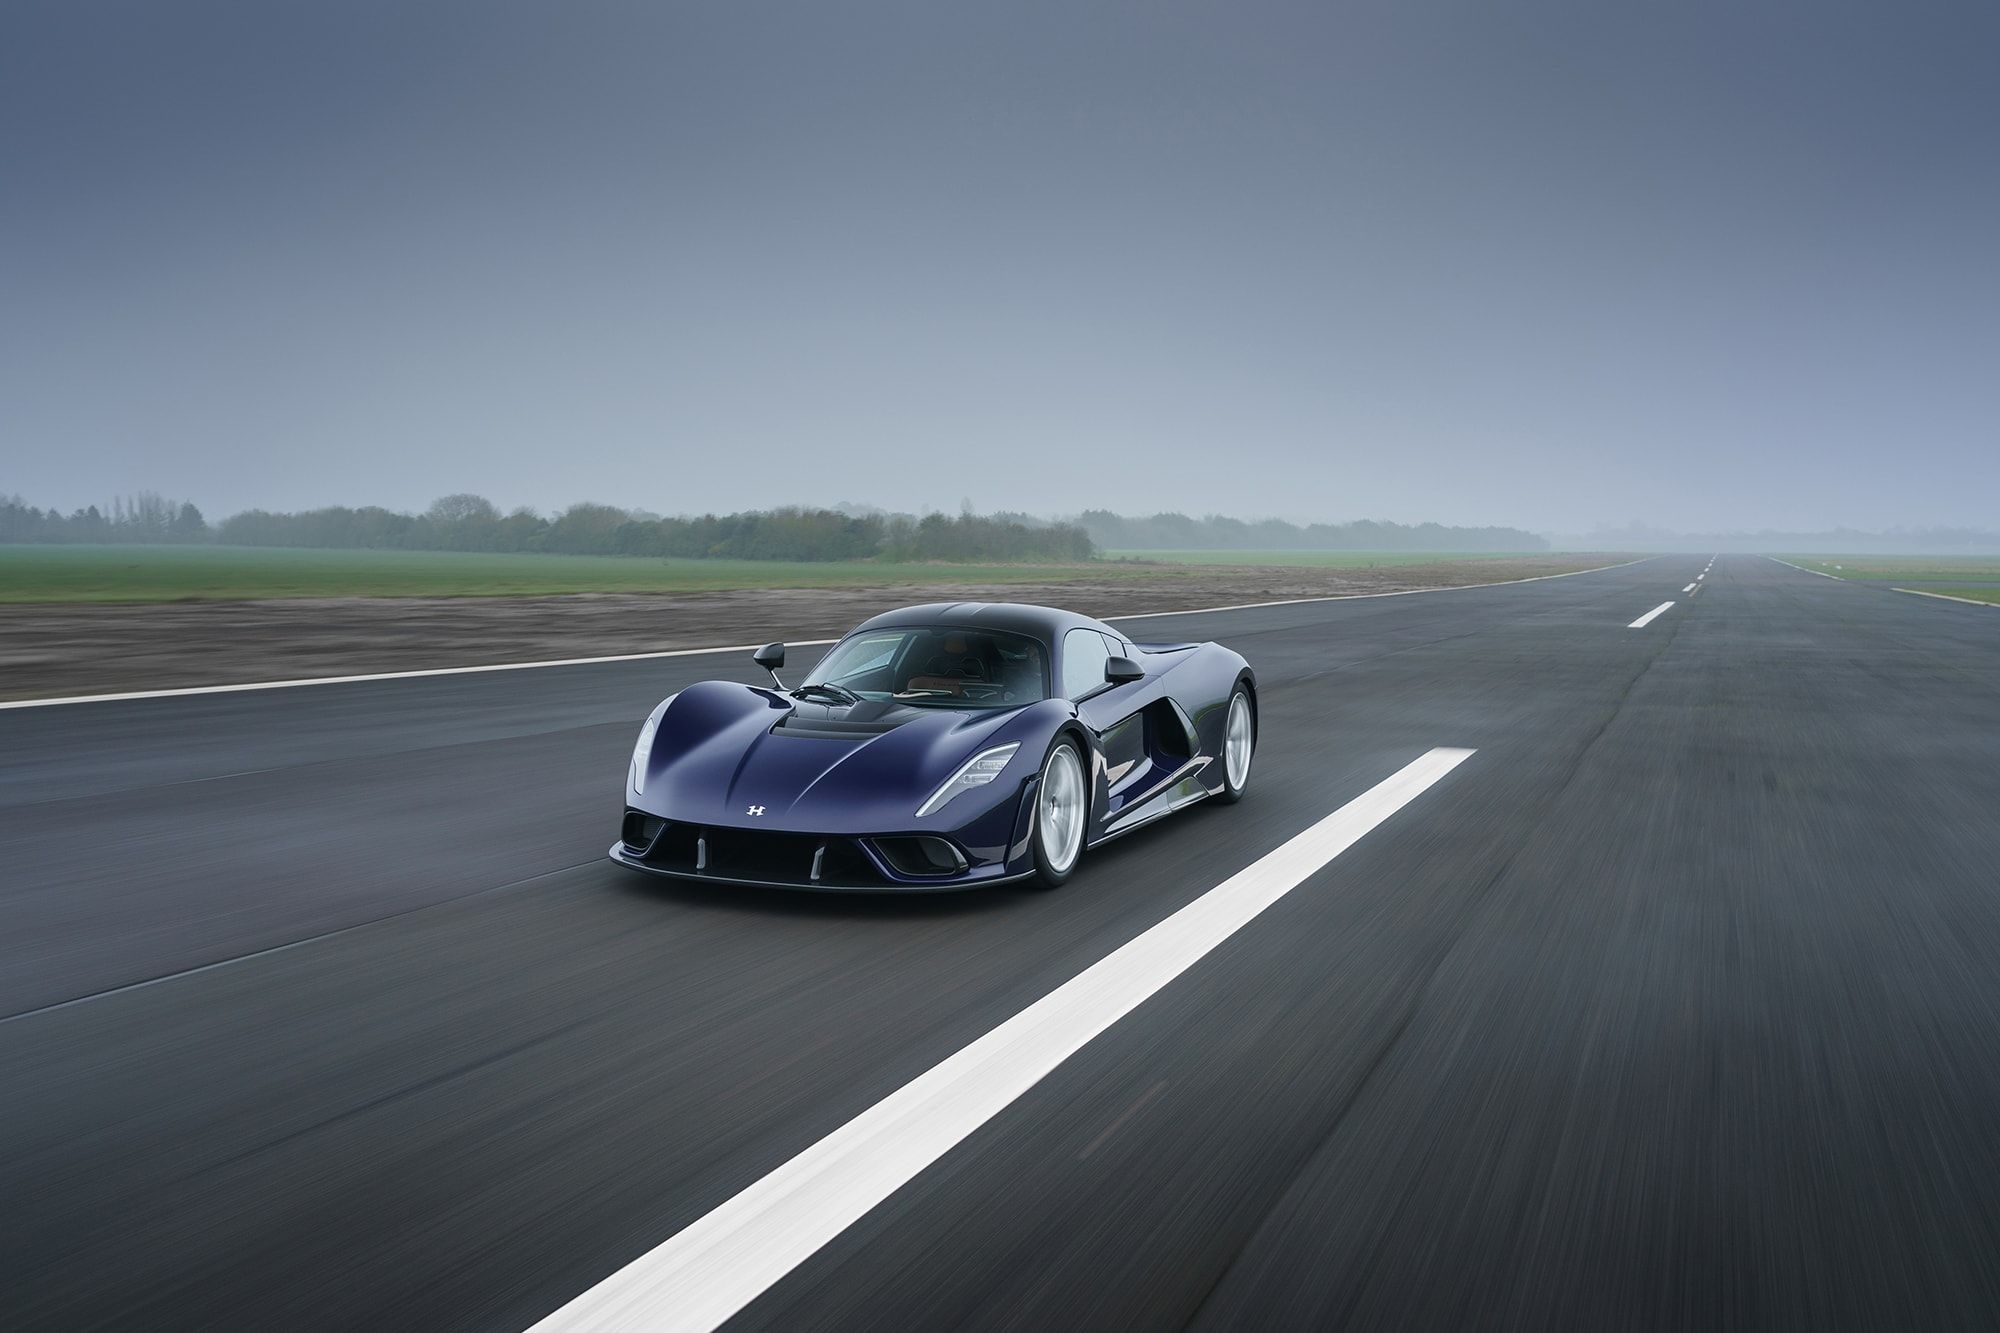 The Hennessey Venom F5 speeds up on the road. 